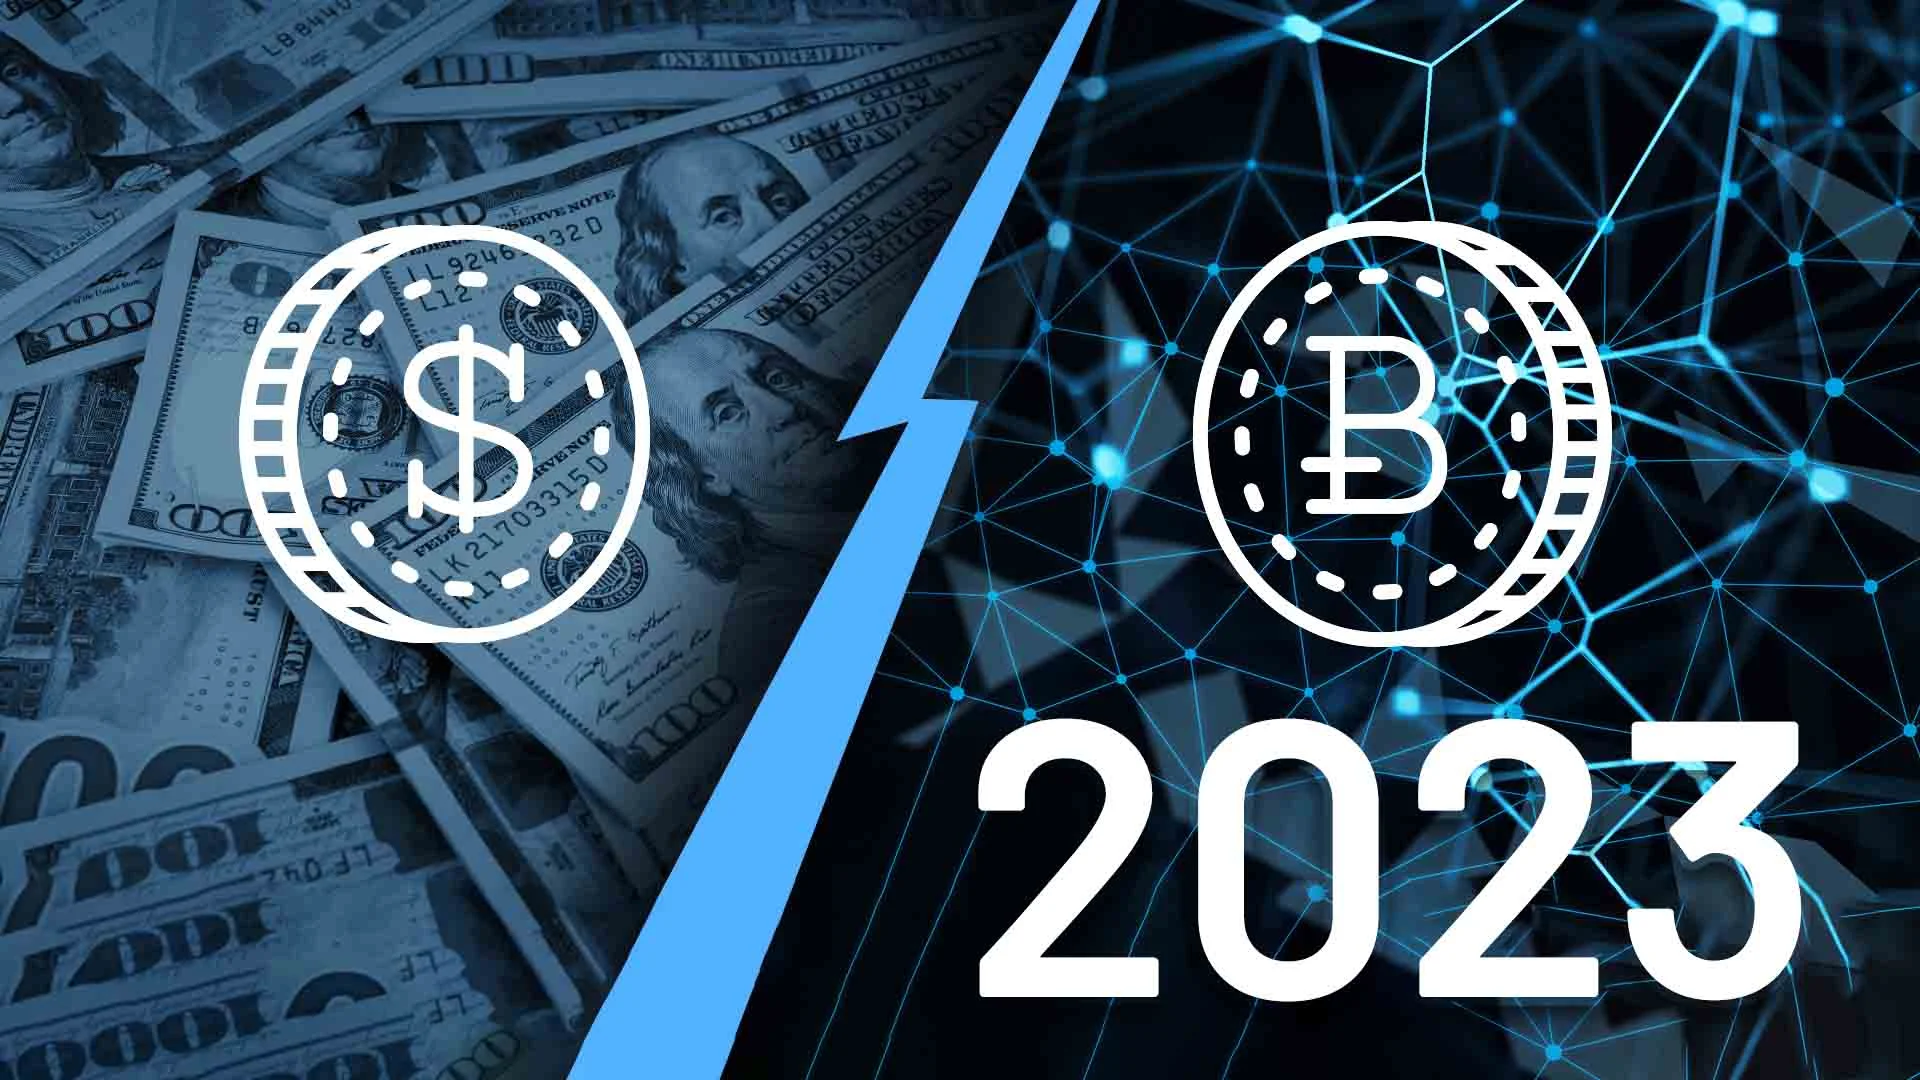 What will happen to Cryptocurrencies in 2023?